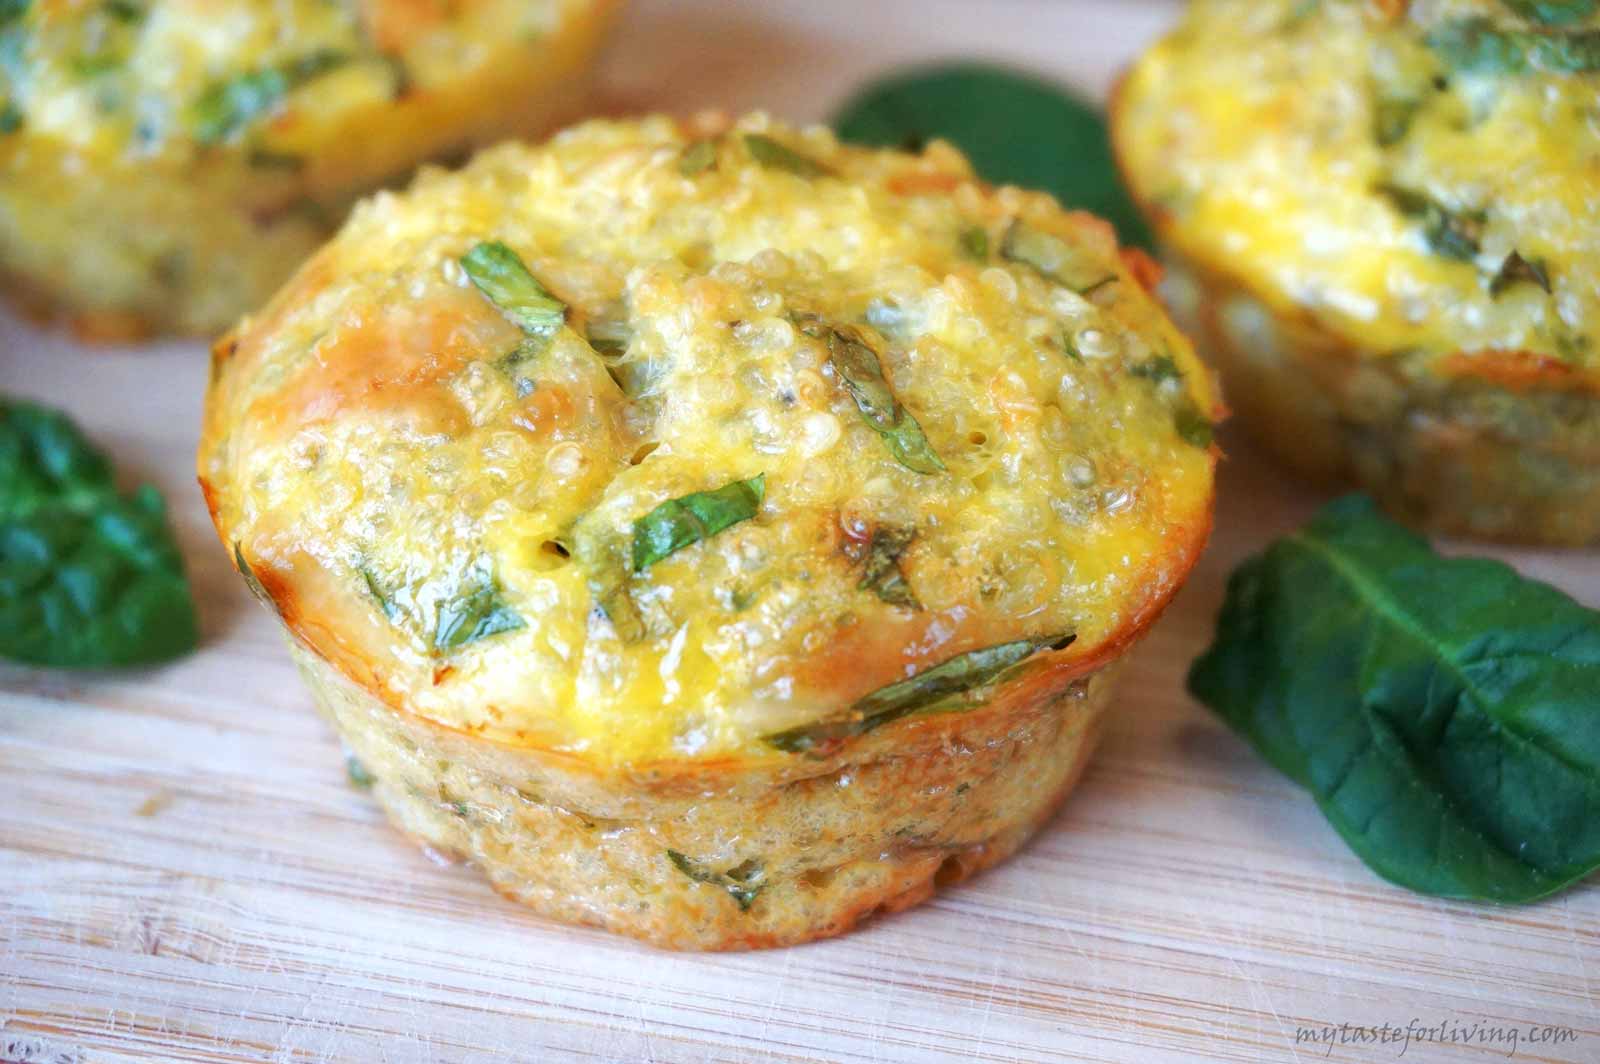 Delicious and healthy muffins made with quinoa, eggs, spinach, feta cheese and yellow cheese,  gluten-free . You can serve them hot or cold, they are suitable for morning or afternoon breakfast, as well as for lunch in a box.